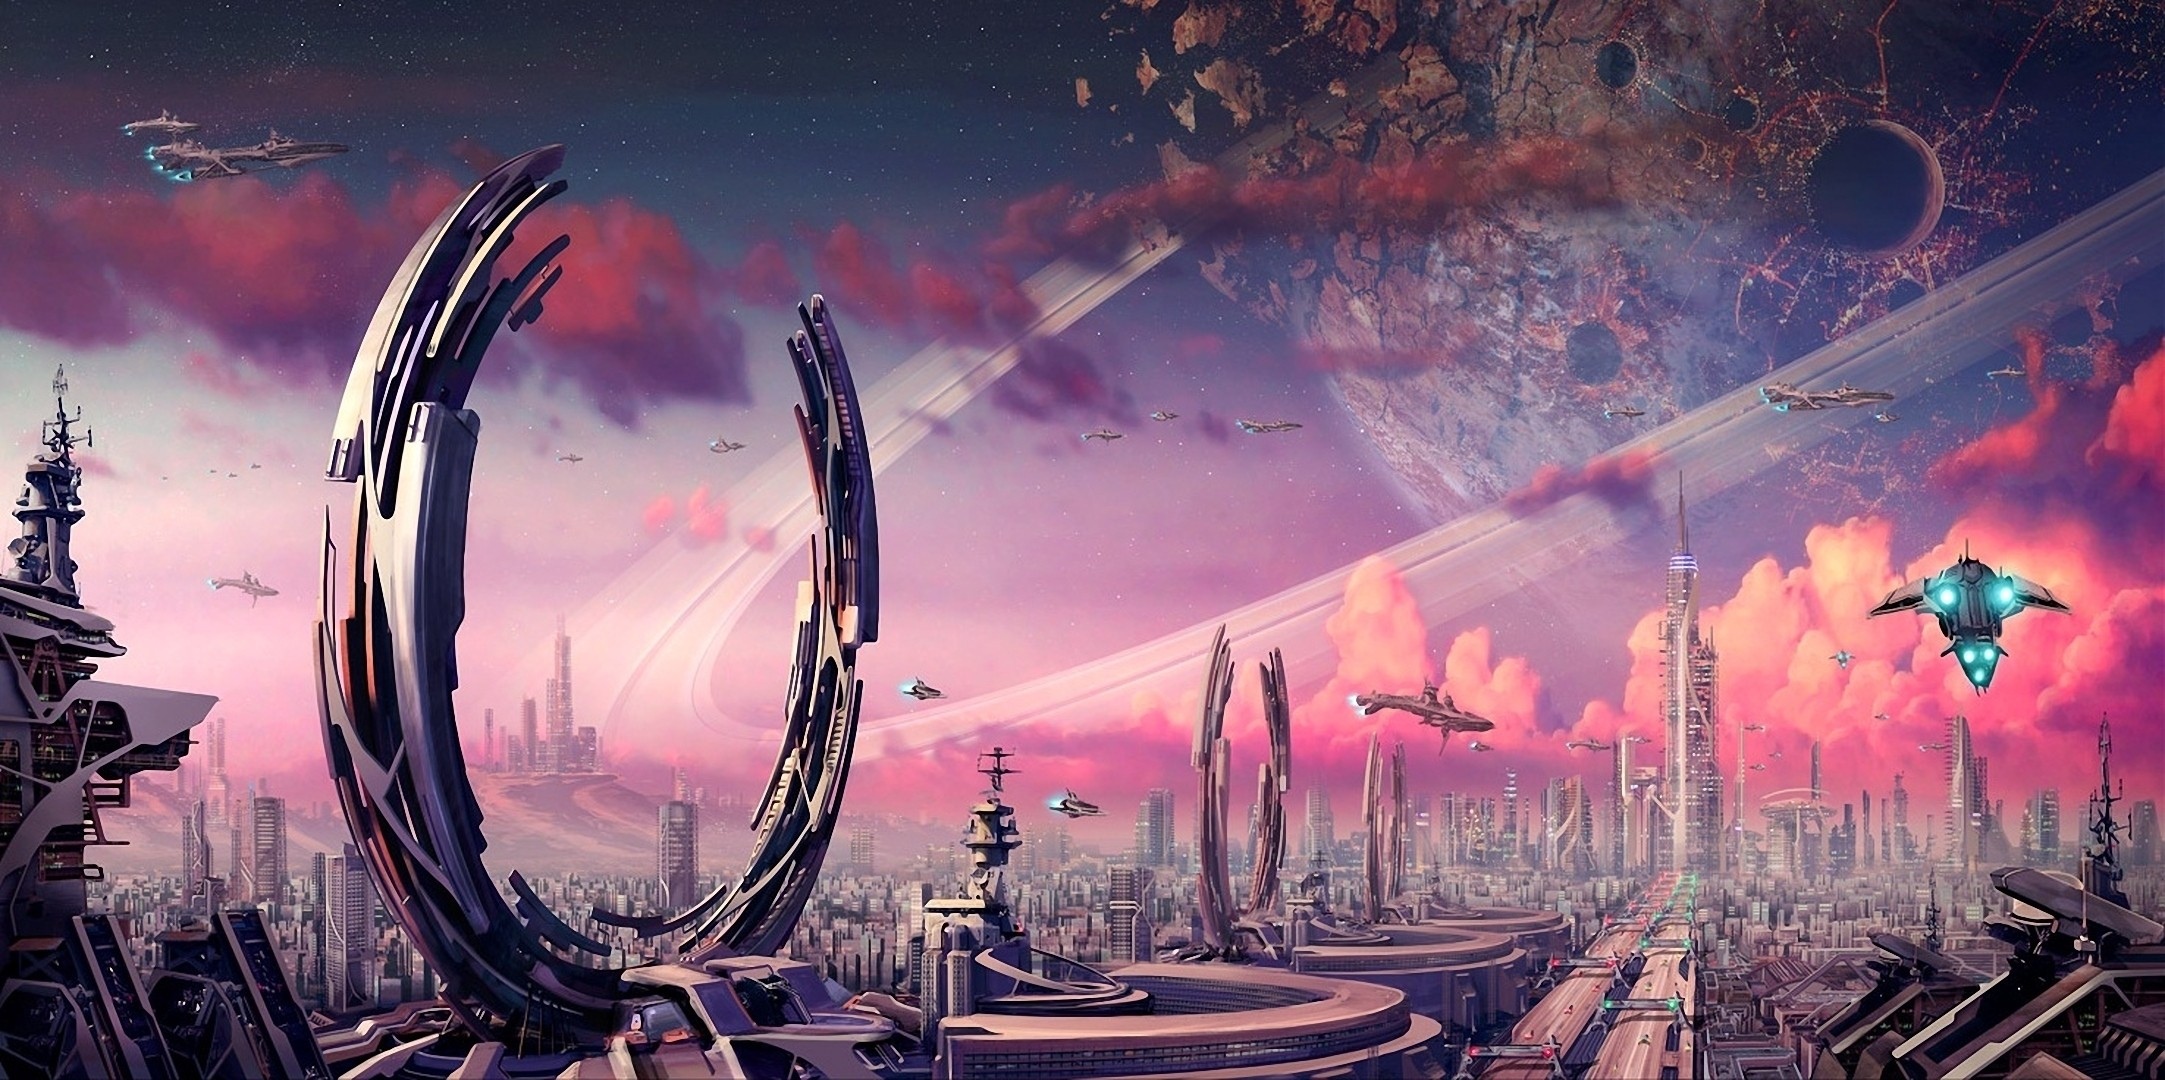 city, fantasy, transport, ships, rings, planet, fiction, that's incredible, crater, constructions, facilities